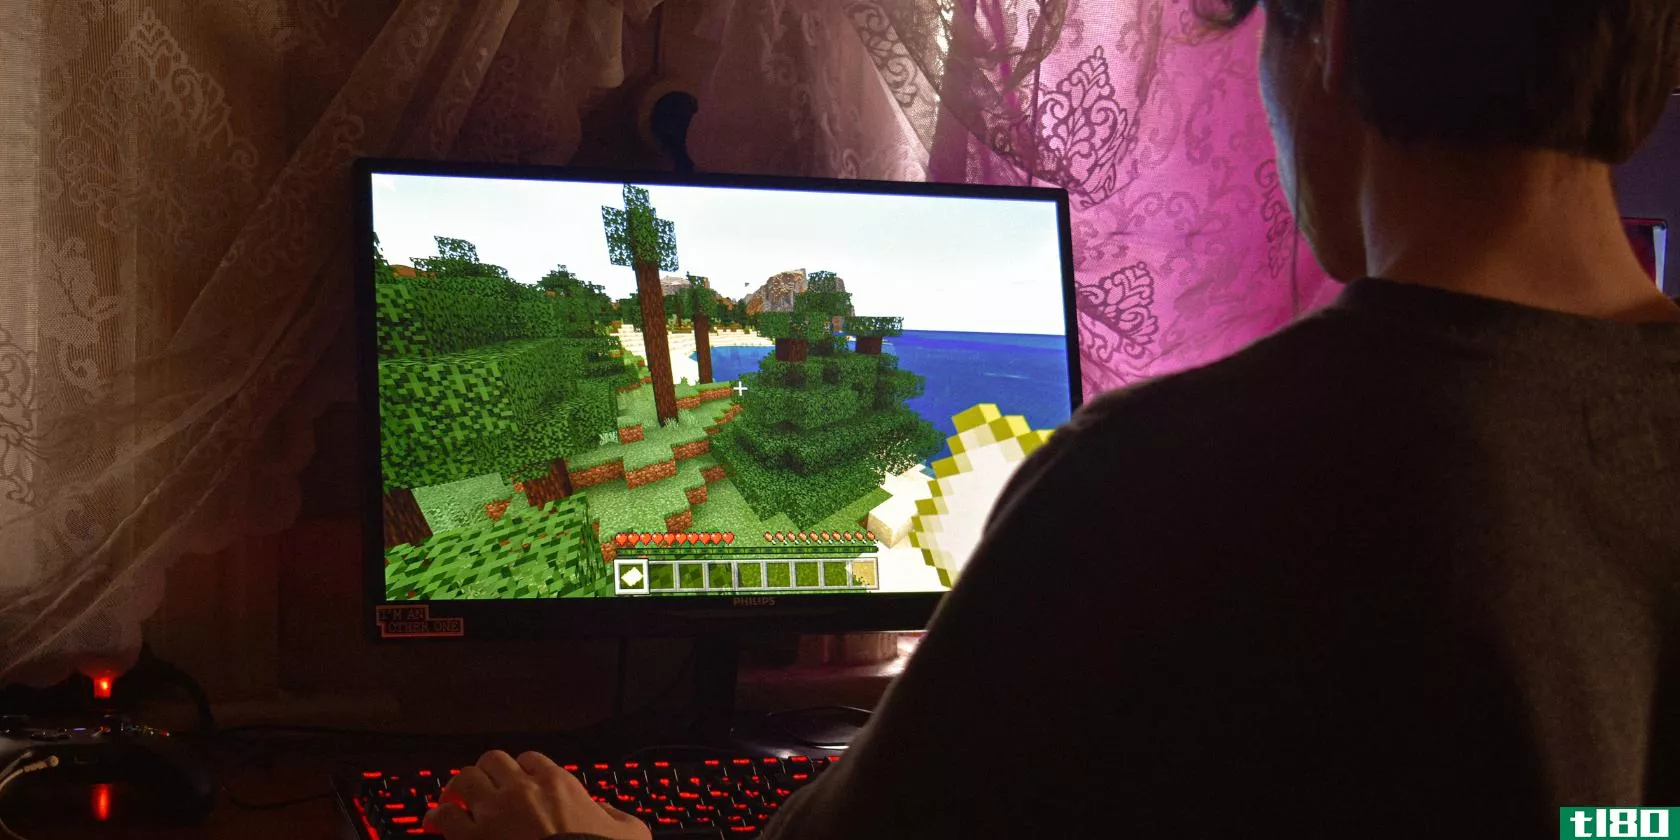 A guy playing games on a PC featured